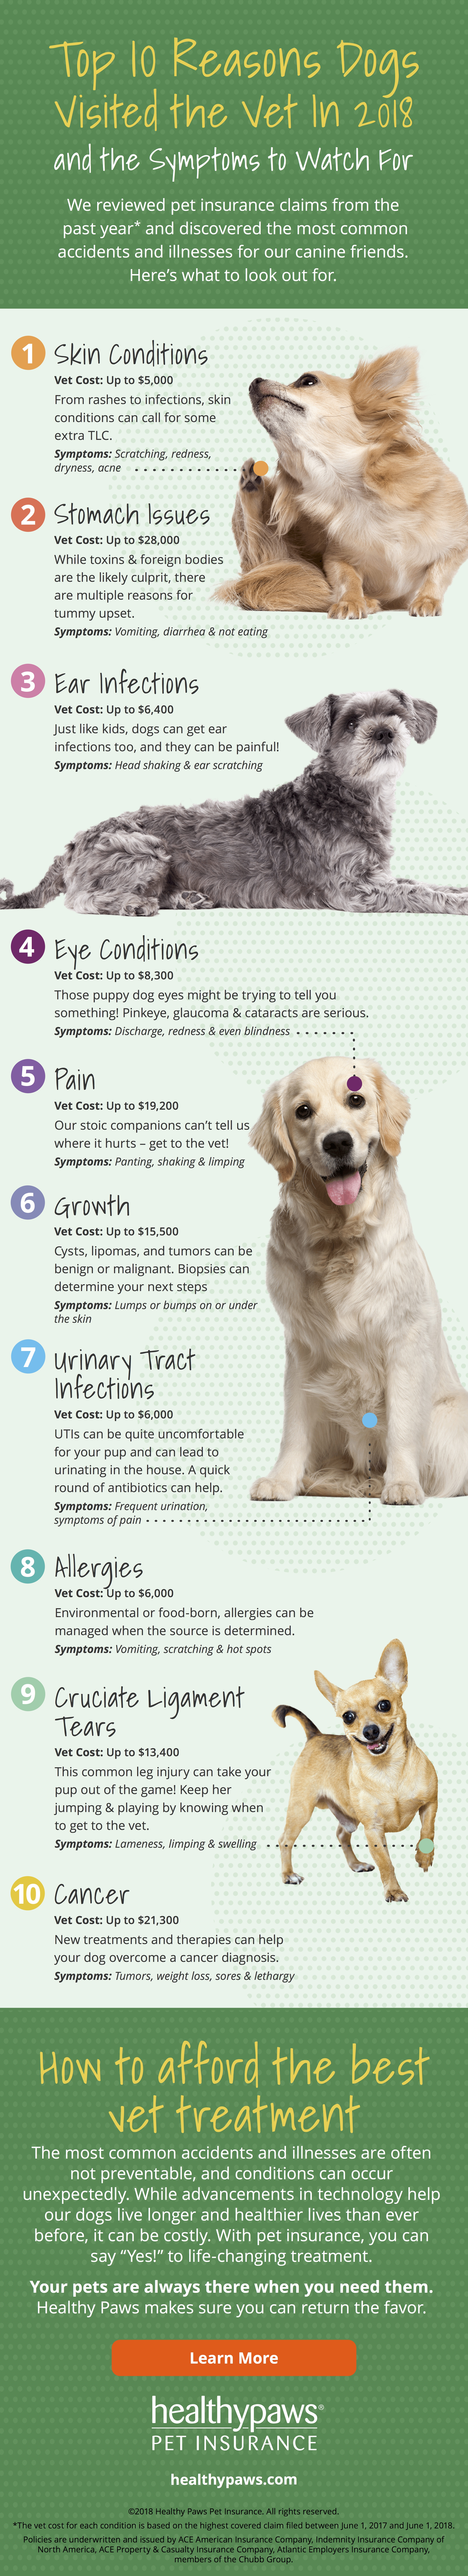 10 reasons dogs visit the vet infographic